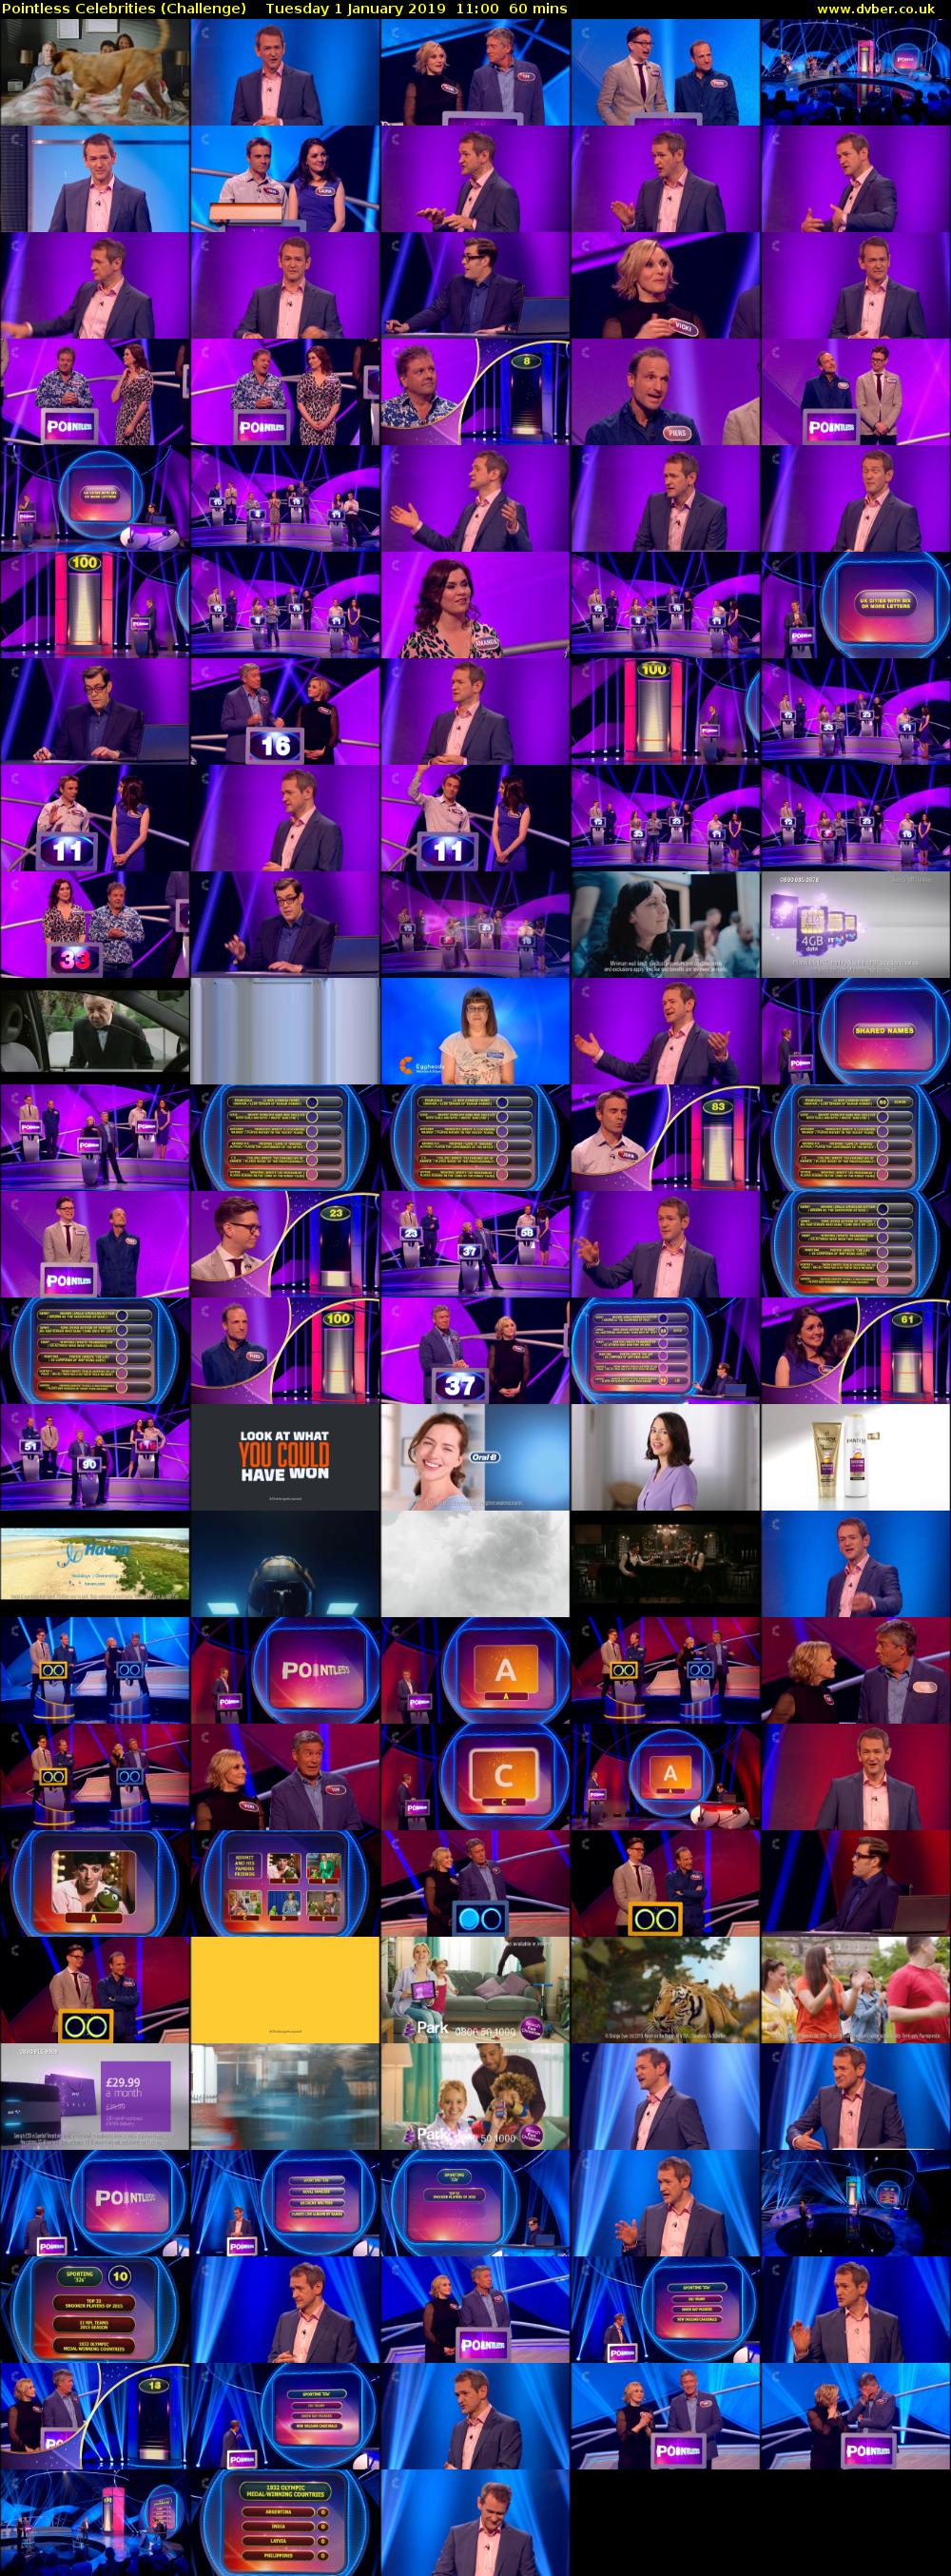 Pointless Celebrities (Challenge) Tuesday 1 January 2019 11:00 - 12:00